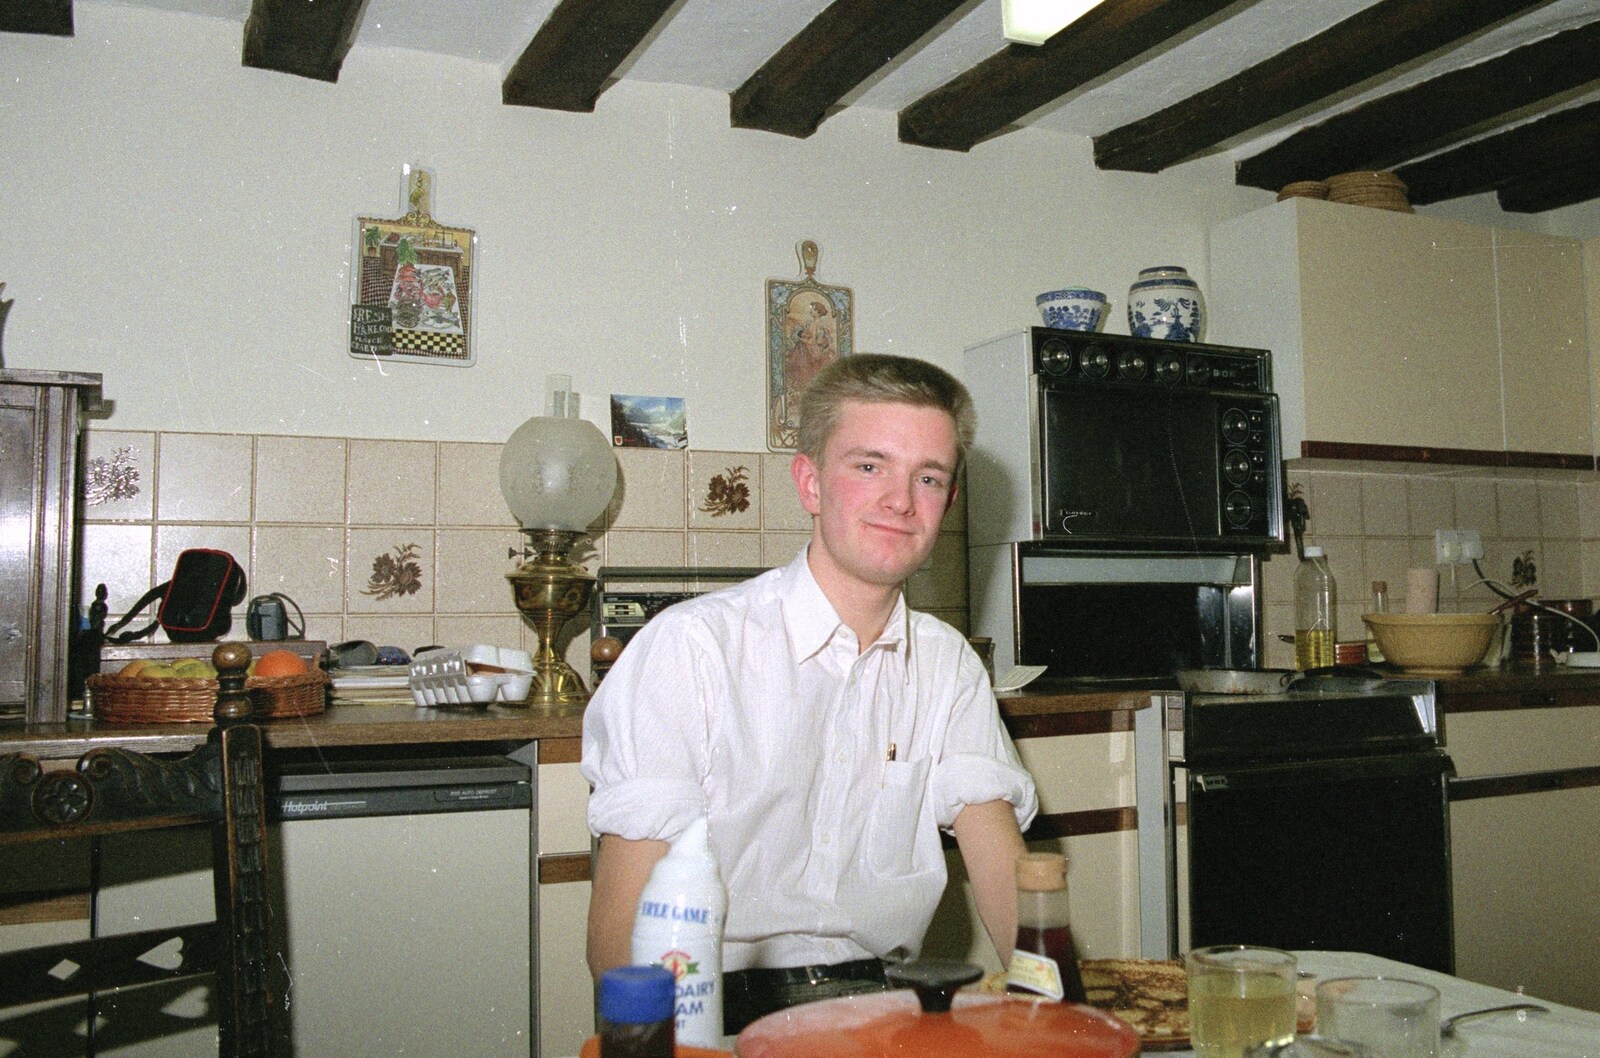 Nosher in the kitchen from Pancake Day, Stuston, Suffolk - 18th February 1991